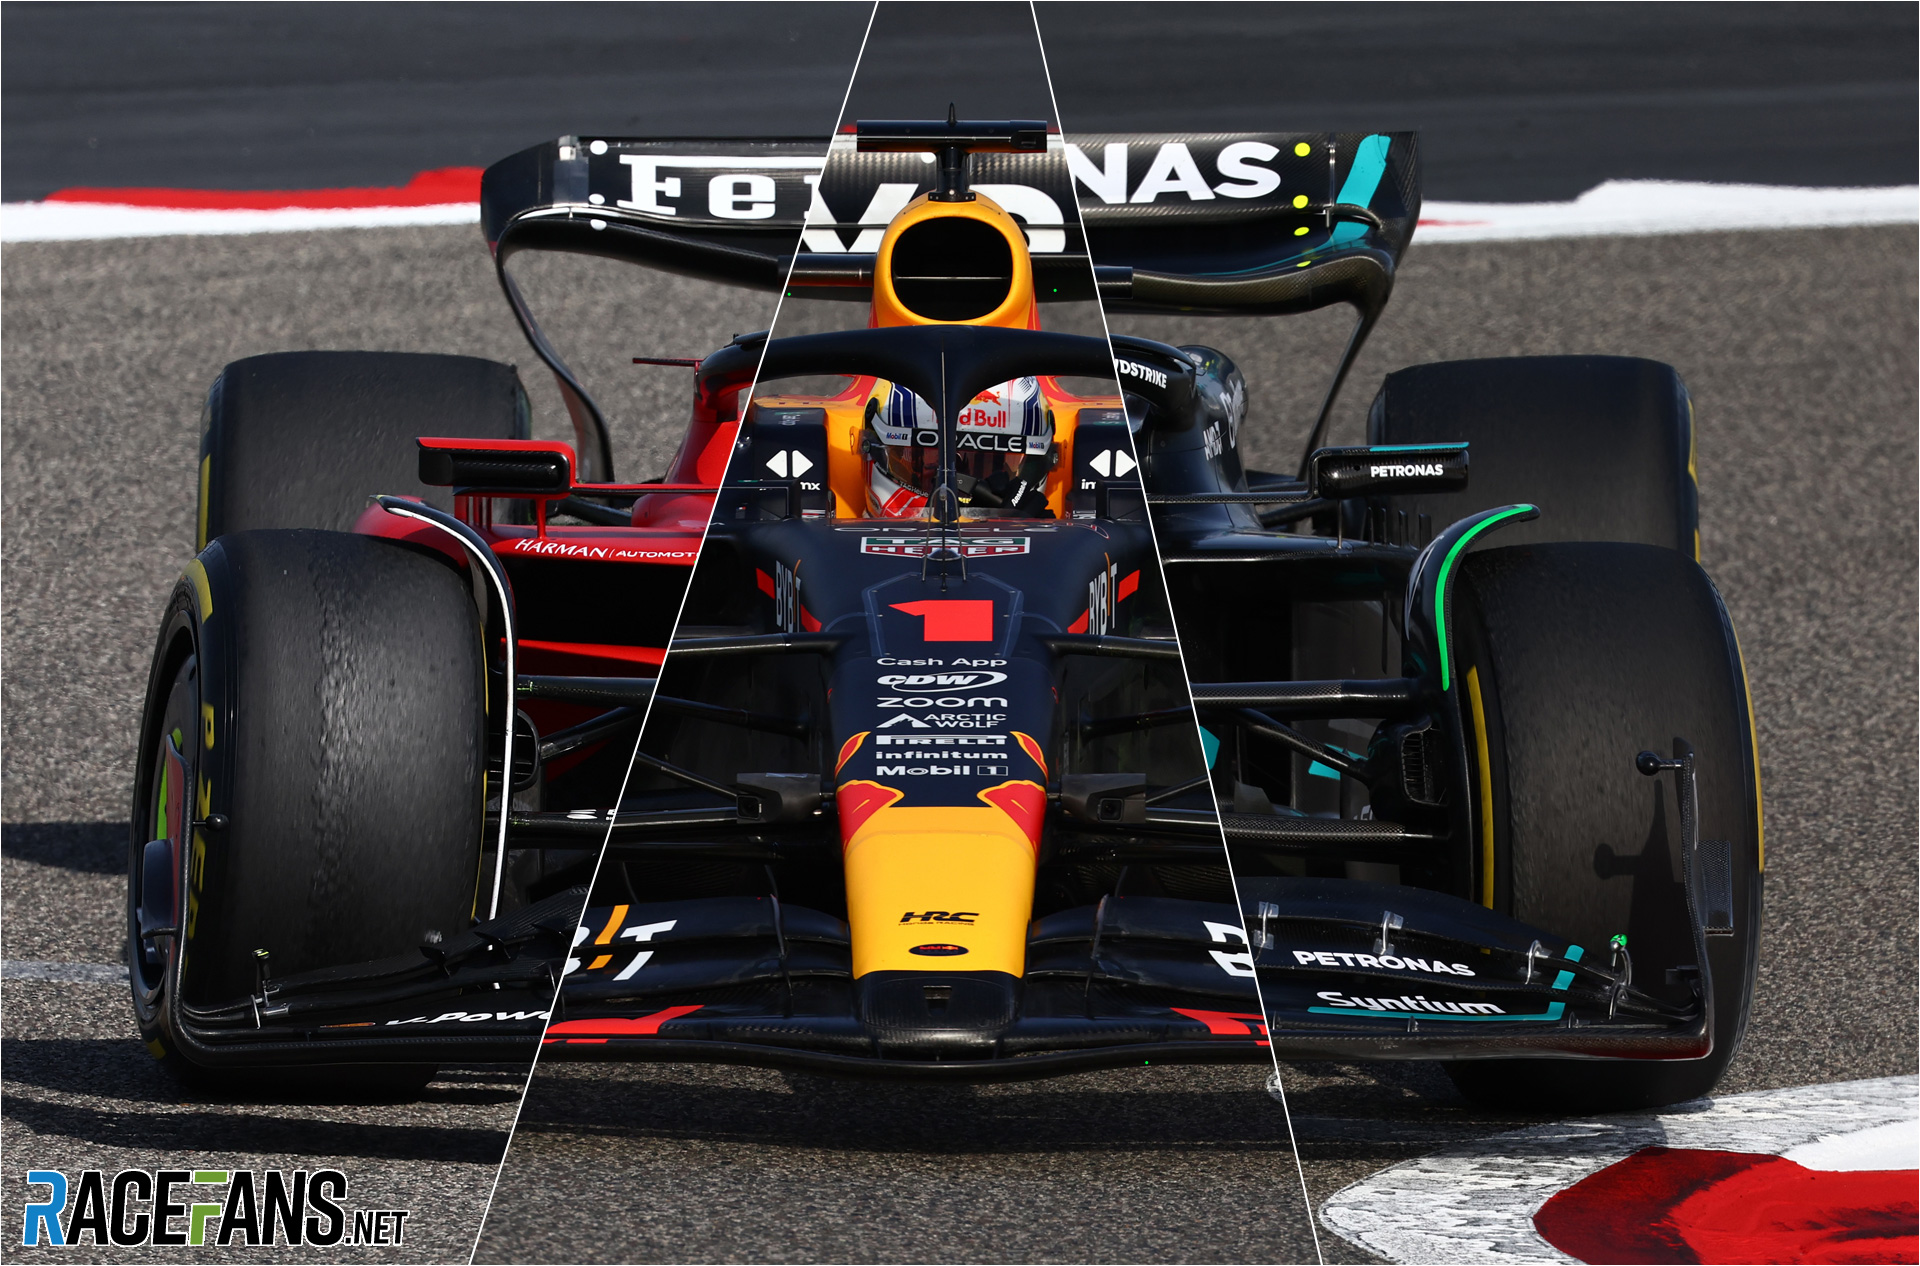 Interactive Compare all 10 F1 cars of 2023 side-by-side · RaceFans